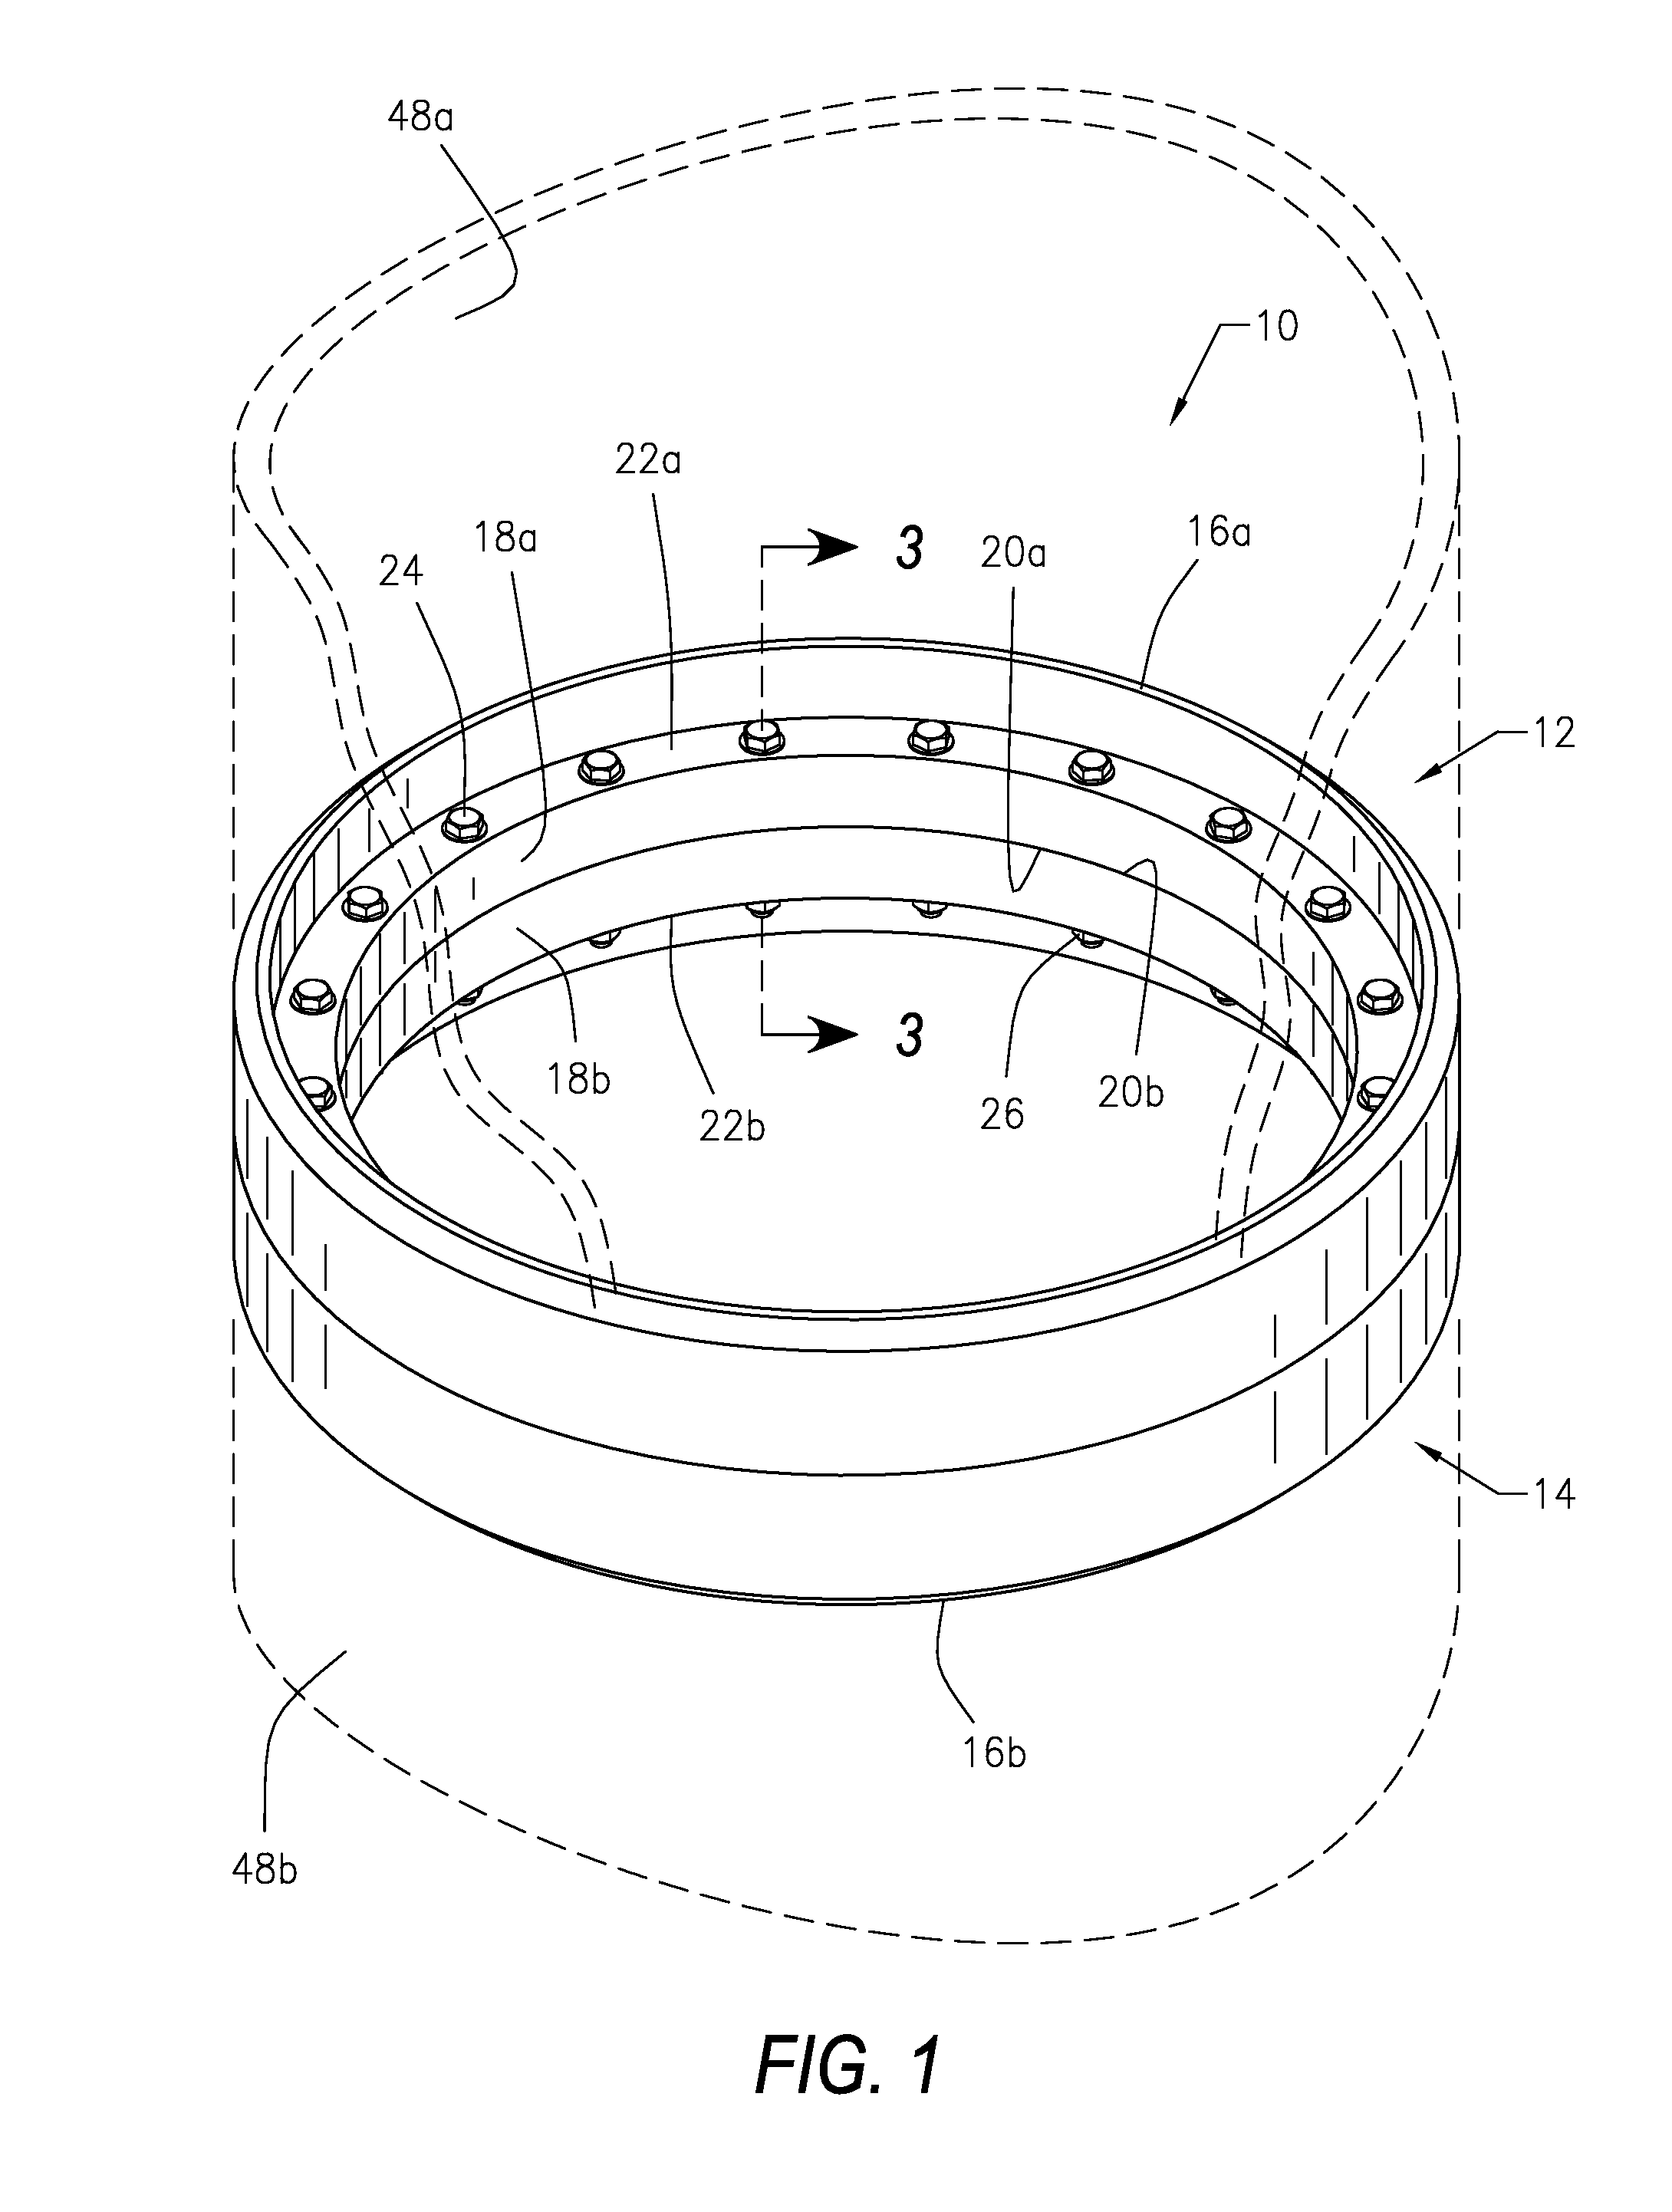 Structural flange connection system and method